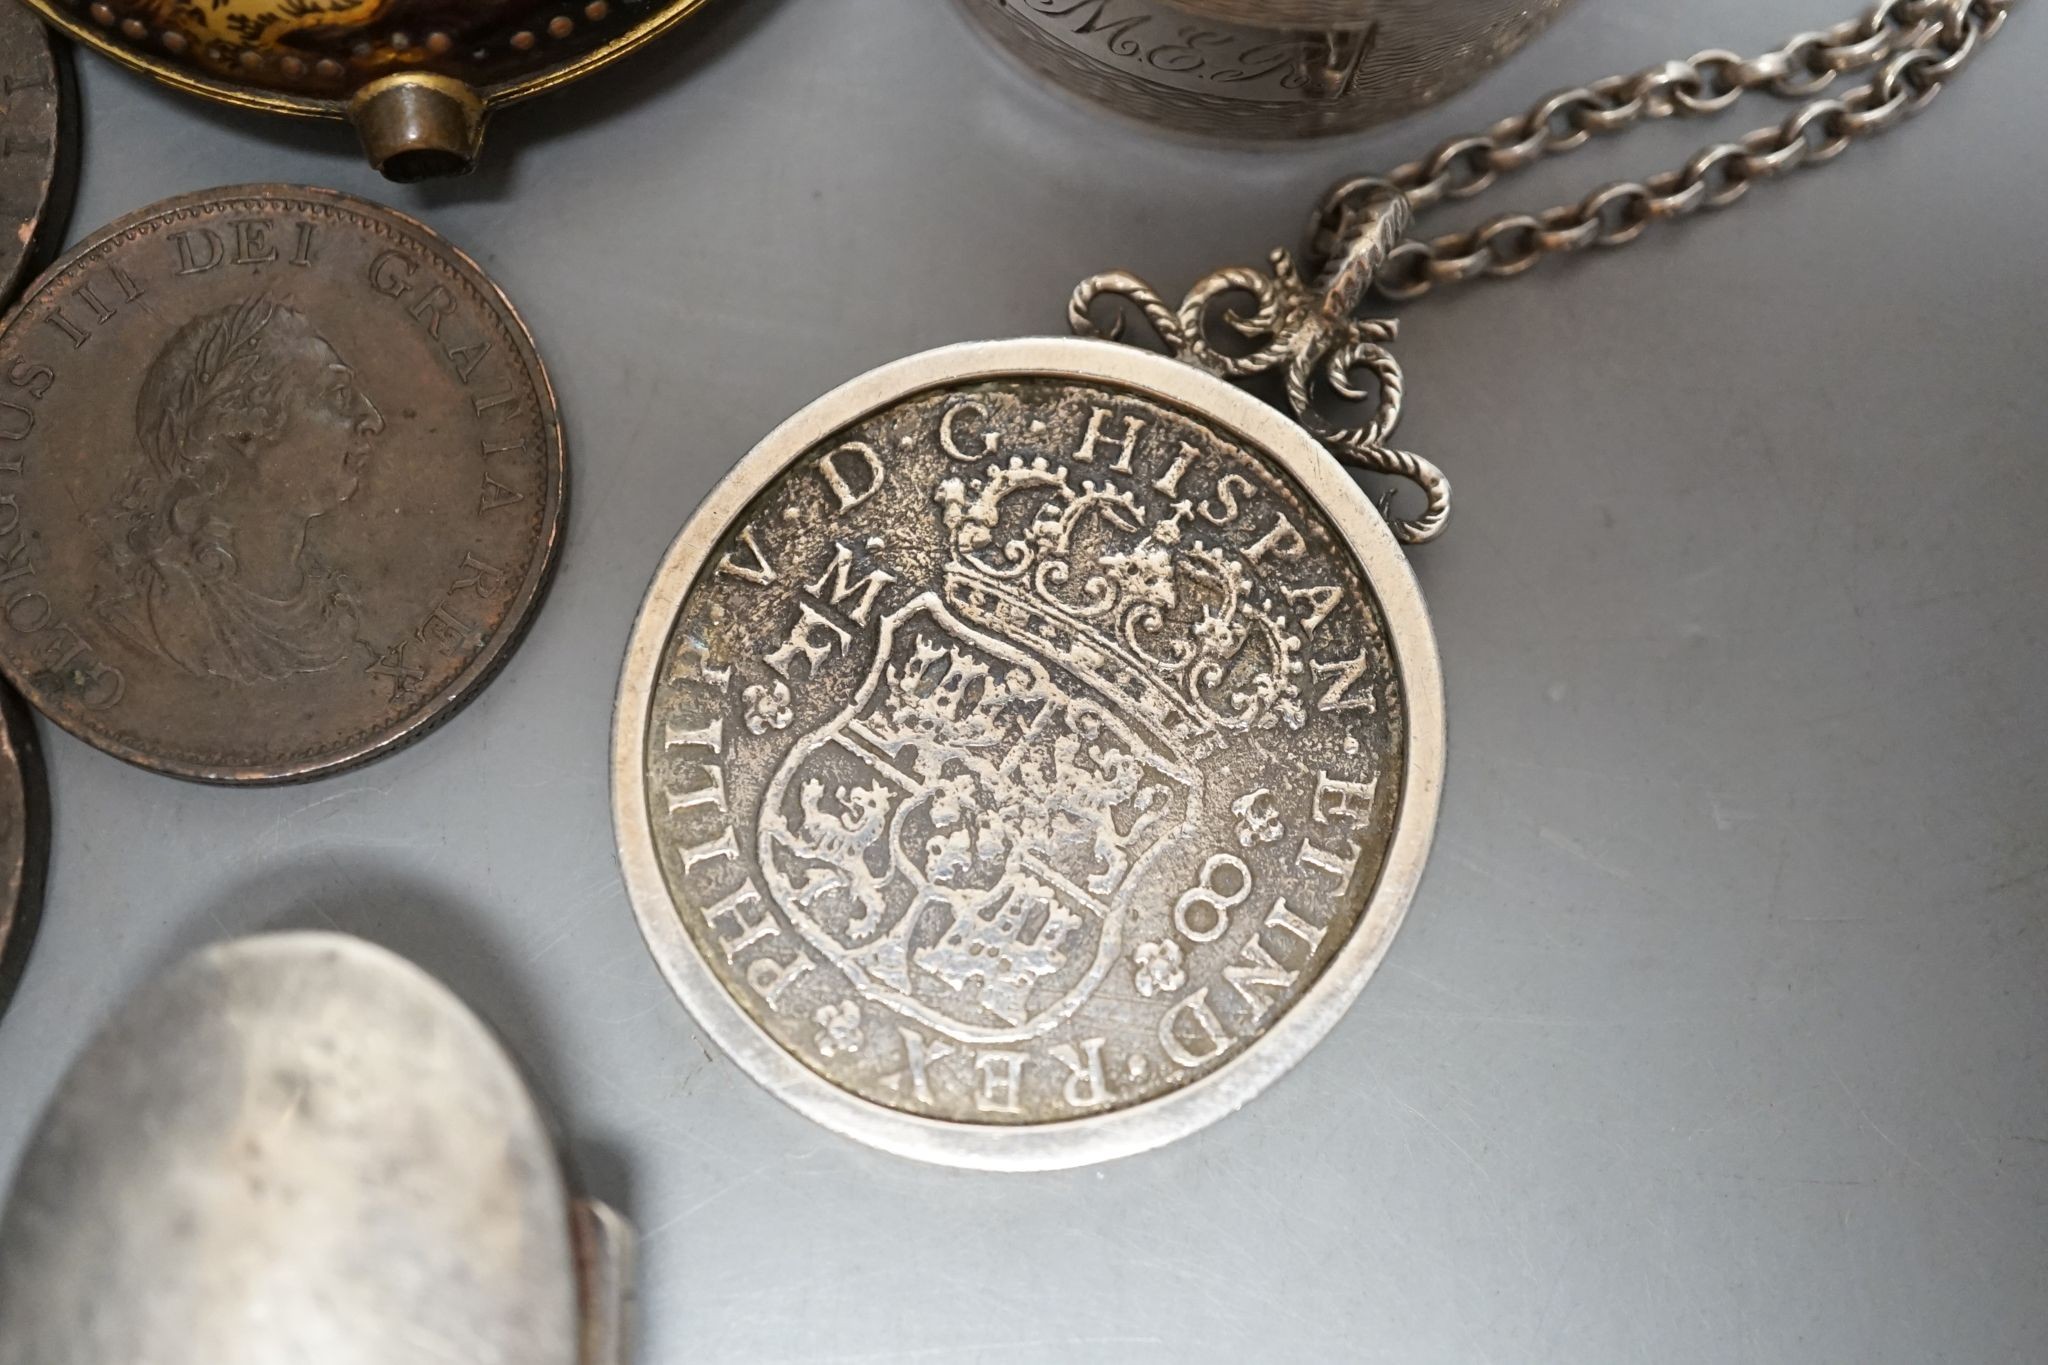 A Philip V 8 Reale coin pendant mounted, assorted 18th century and later coinage, faux tortoiseshell watch case and sundries